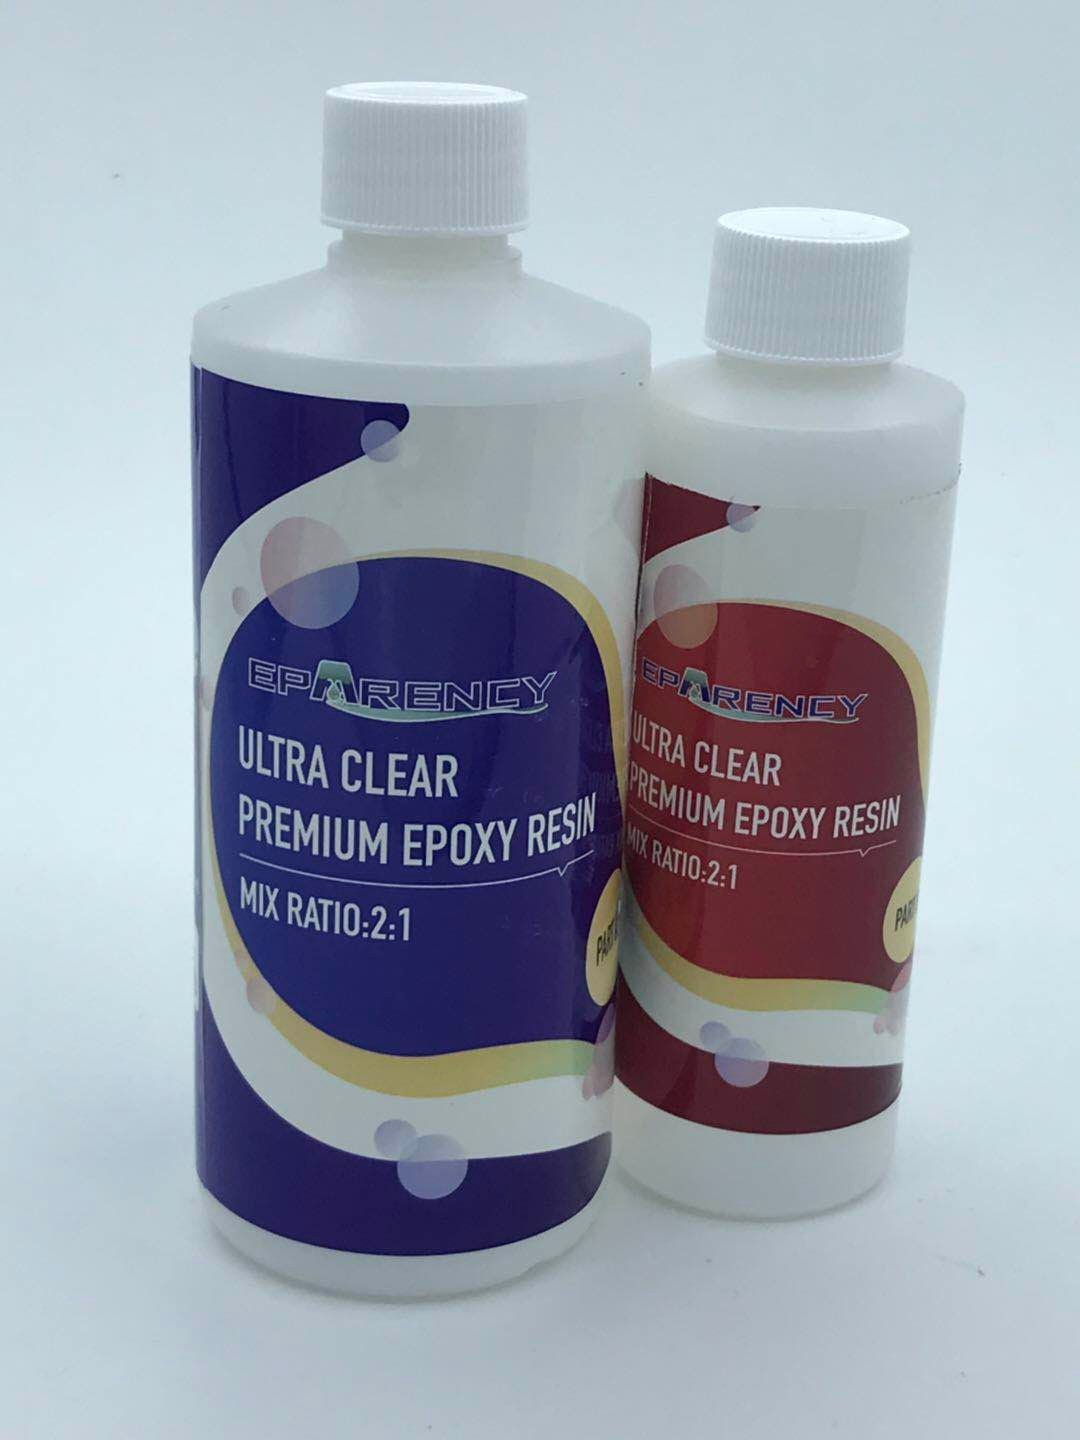 UltraClear Epoxy Sales and Coupons Deals